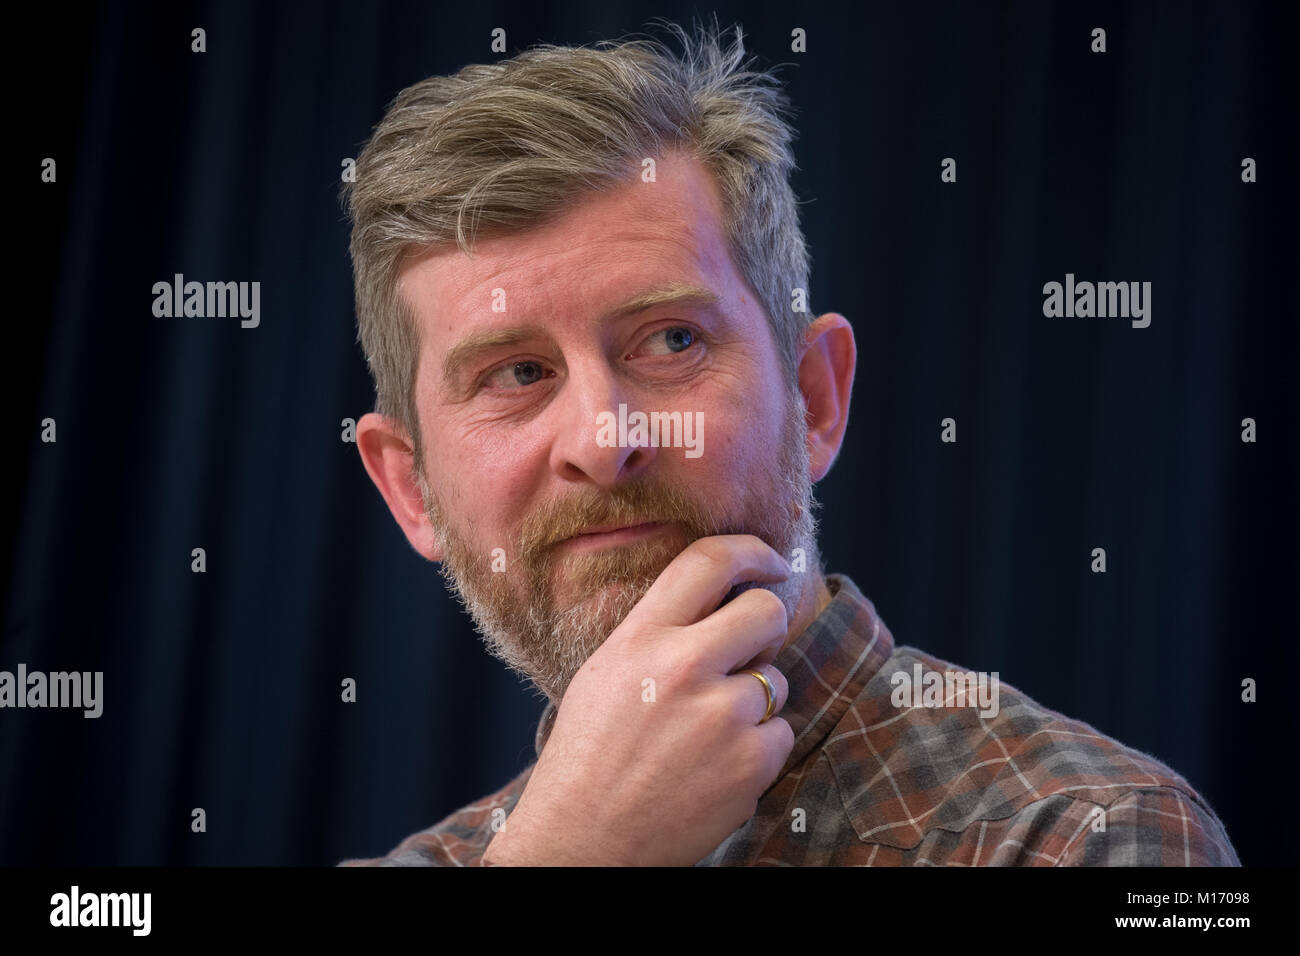 Moscow, Russia. 25th January, 2018. Film director Nikolai Khomeriki at a news conference ahead of the press-preview of the Selfie film at the Rossiya Segodnya news agency's international multimedia press center. Credit: Victor Vytolskiy/Alamy Live News Stock Photo